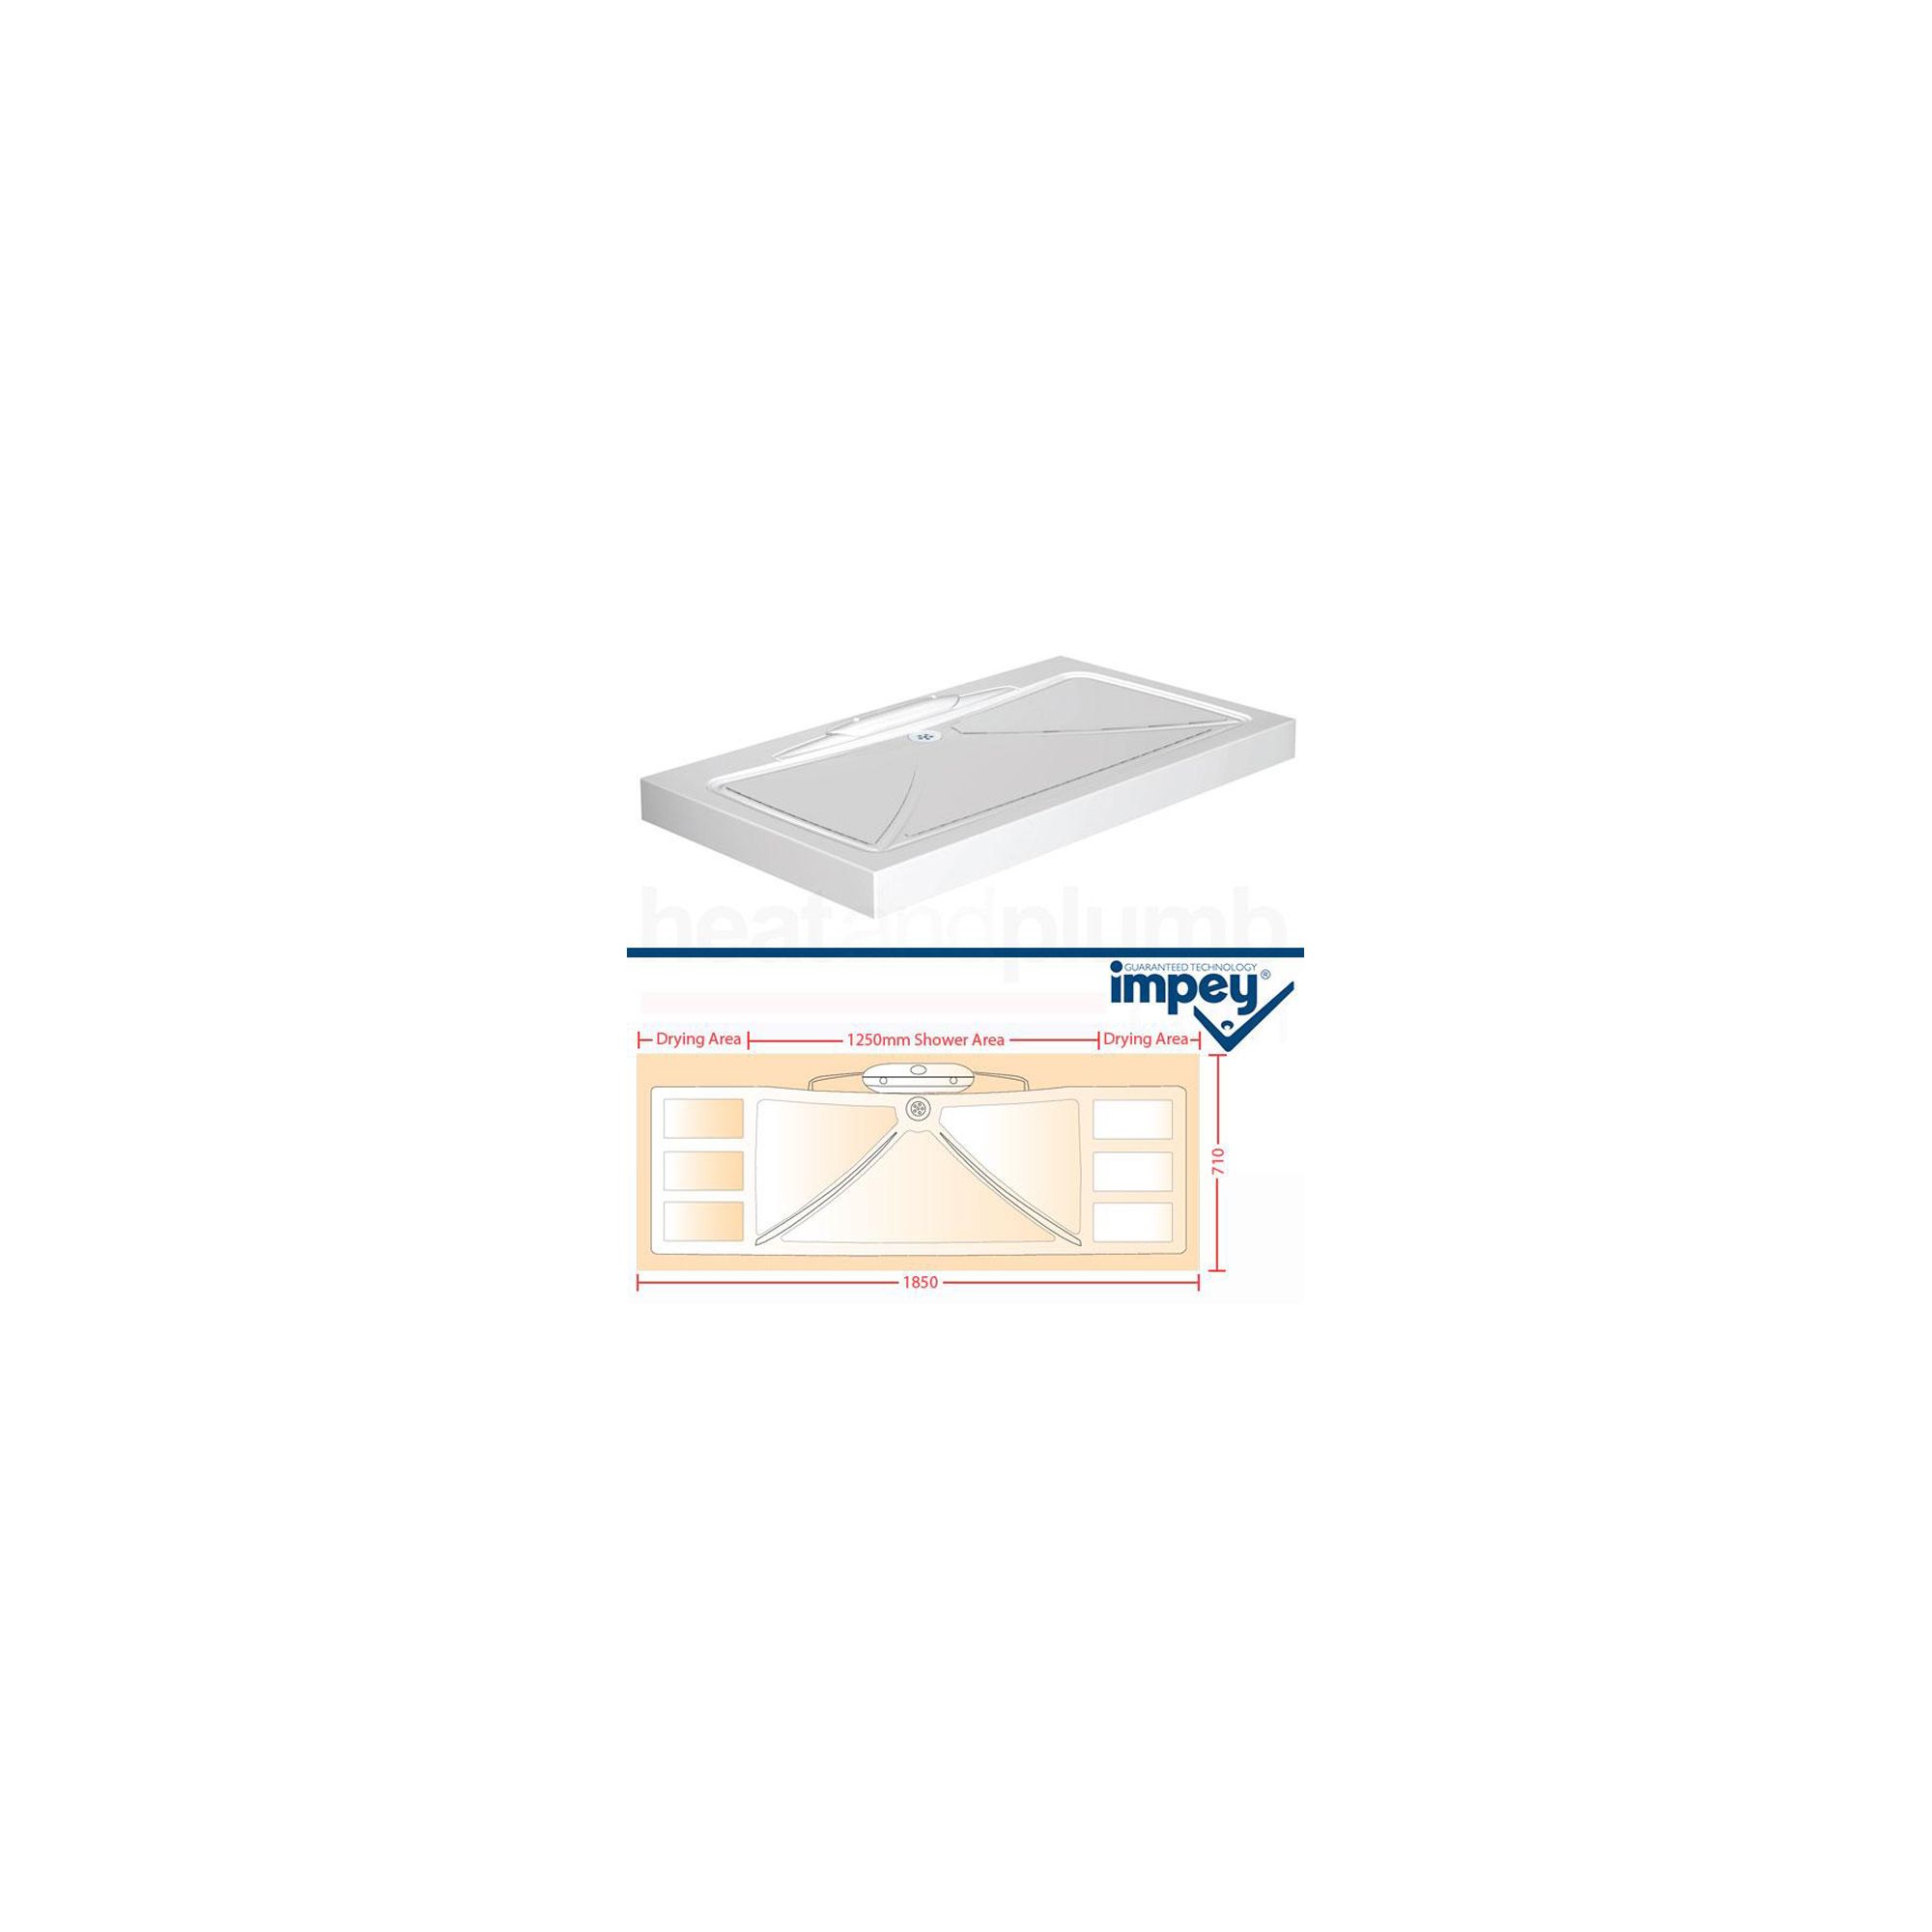 Impey Mendip Shower Tray 1850mm x 710mm at Tescos Direct